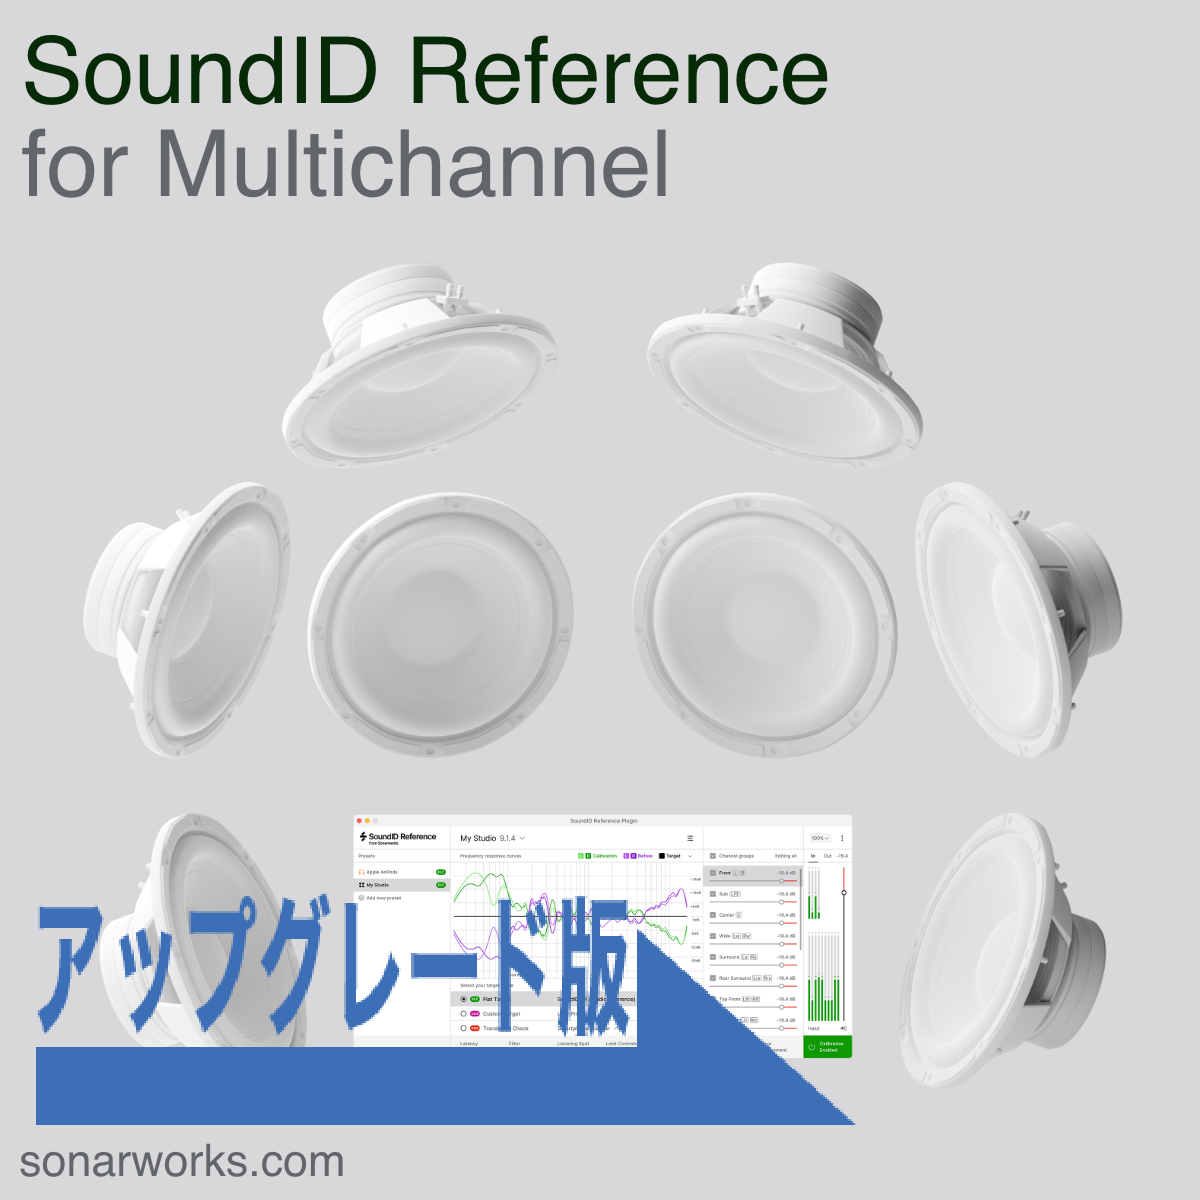 Upgrade from SoundID Reference for Speakers and Headphones to Multichannel (key only)